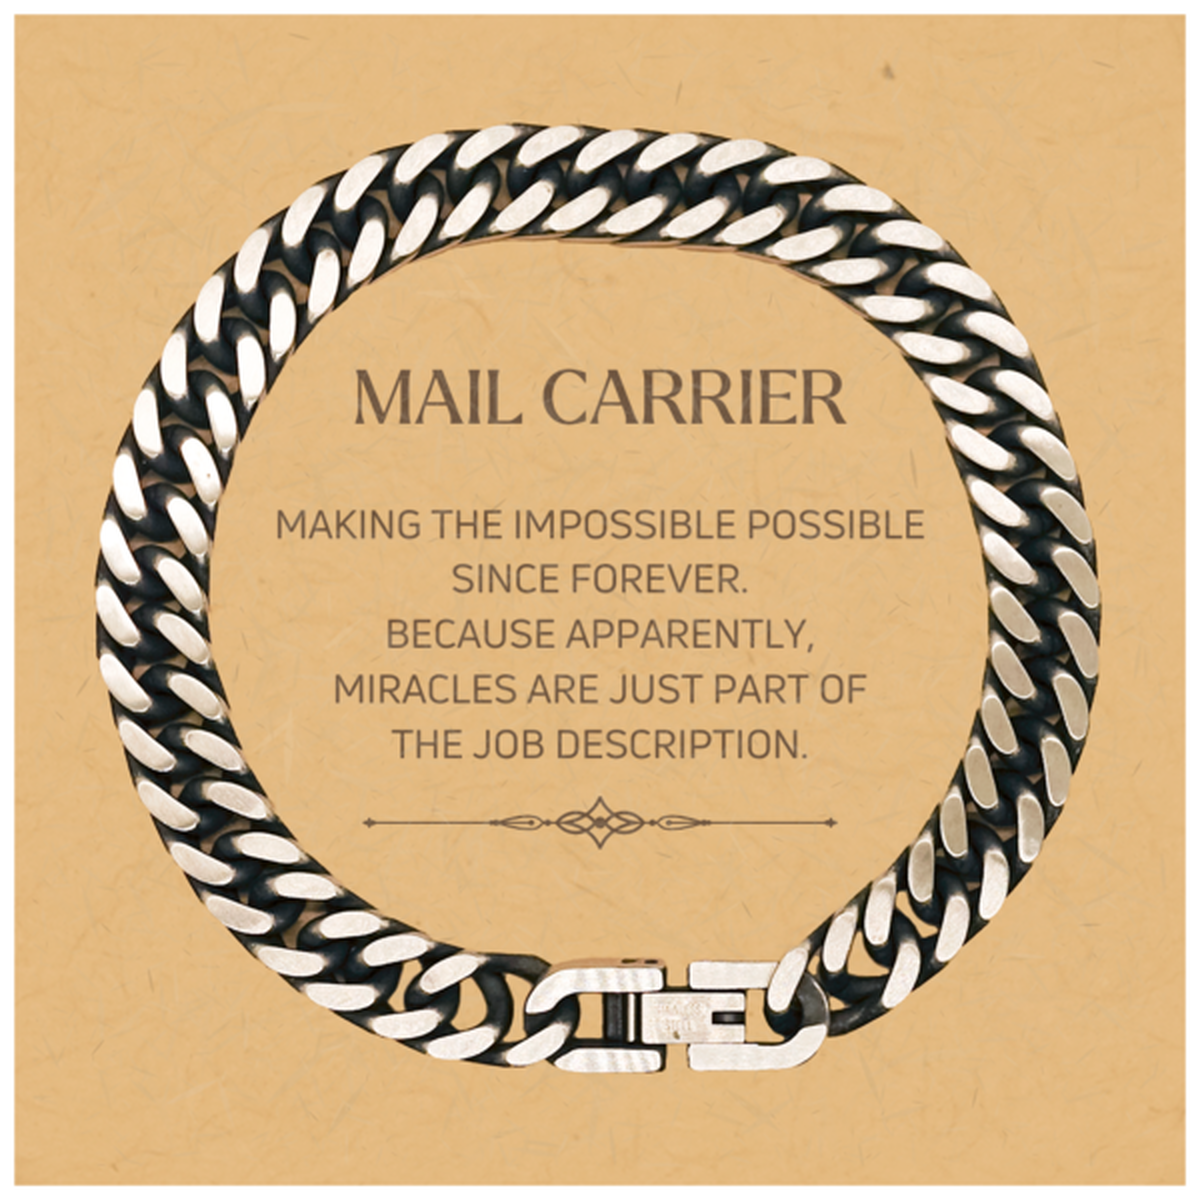 Funny Mail Carrier Gifts, Miracles are just part of the job description, Inspirational Birthday Christmas Cuban Link Chain Bracelet For Mail Carrier, Men, Women, Coworkers, Friends, Boss